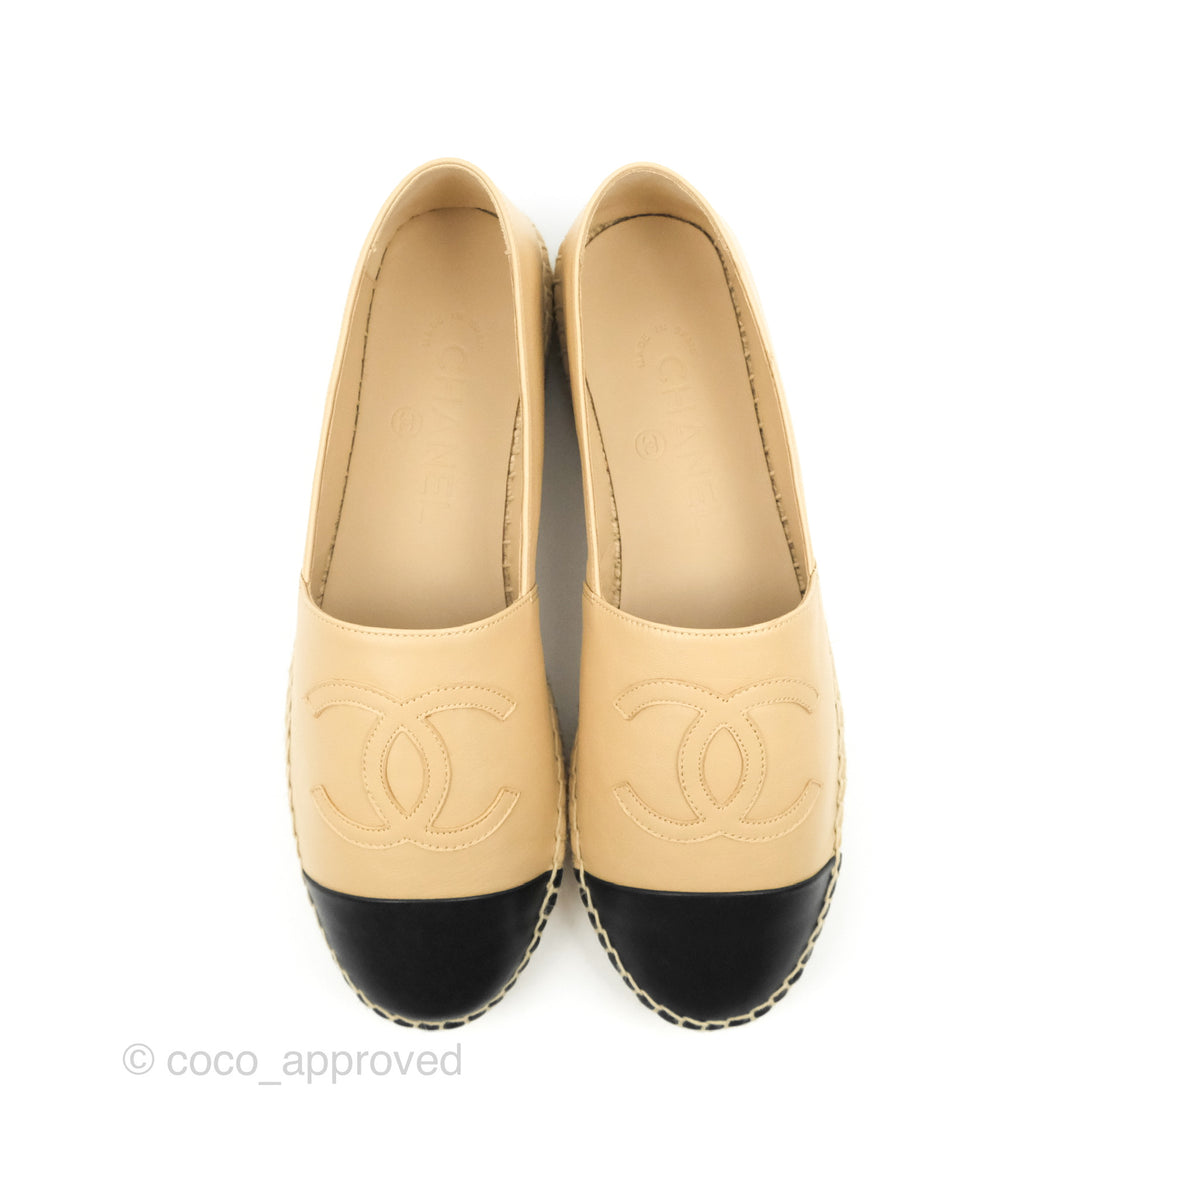 Chanel CC Espadrilles Beige Black Lambskin Size 38 – Coco Approved